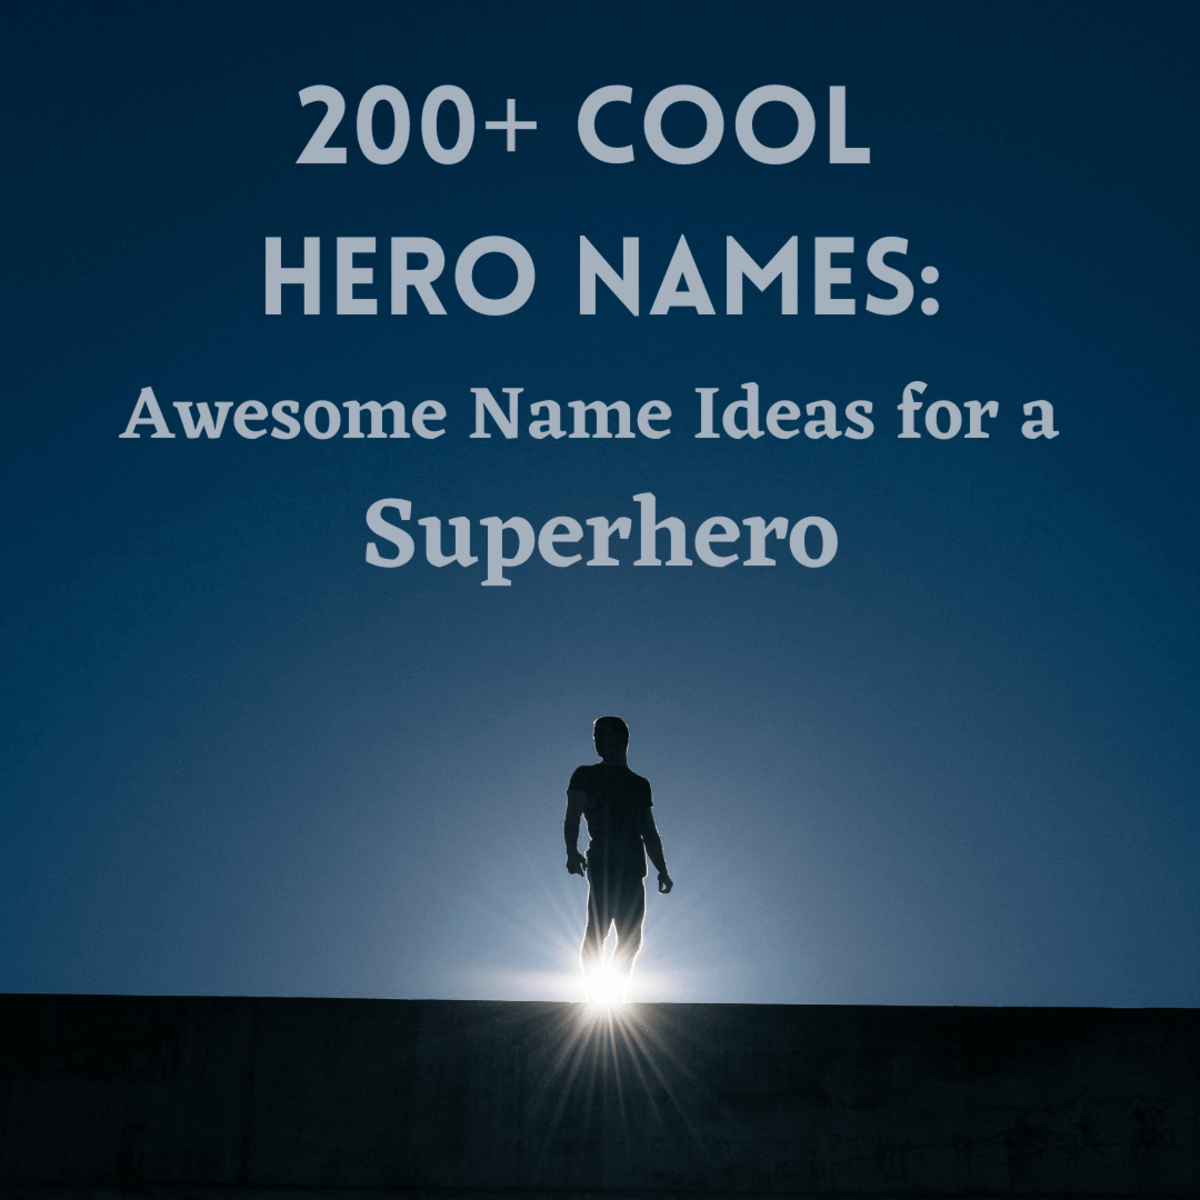 Awesome Name Ideas for Superheroes